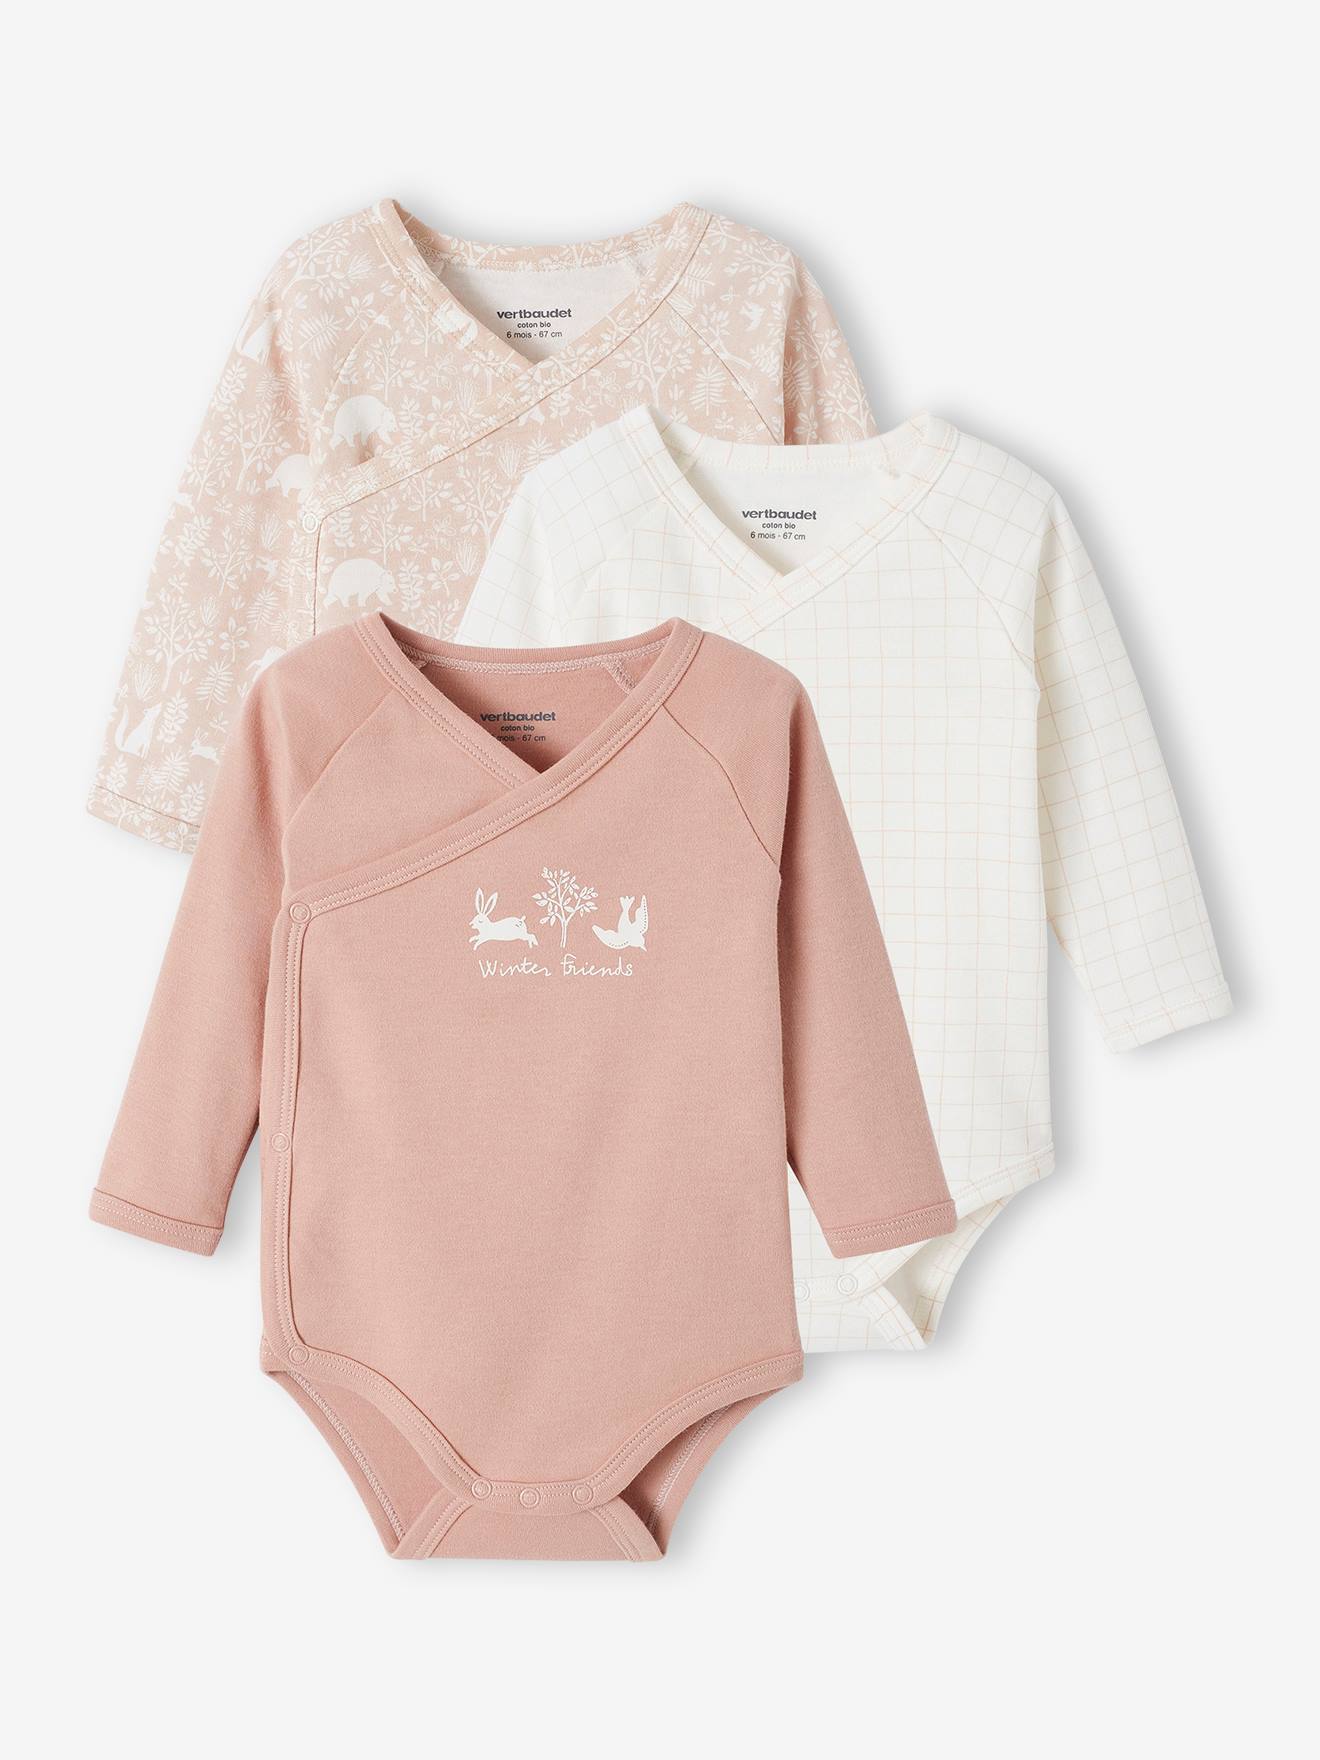 Pack of 3 Long-Sleeved Bodysuits in Organic Cotton for Newborn Babies rosy